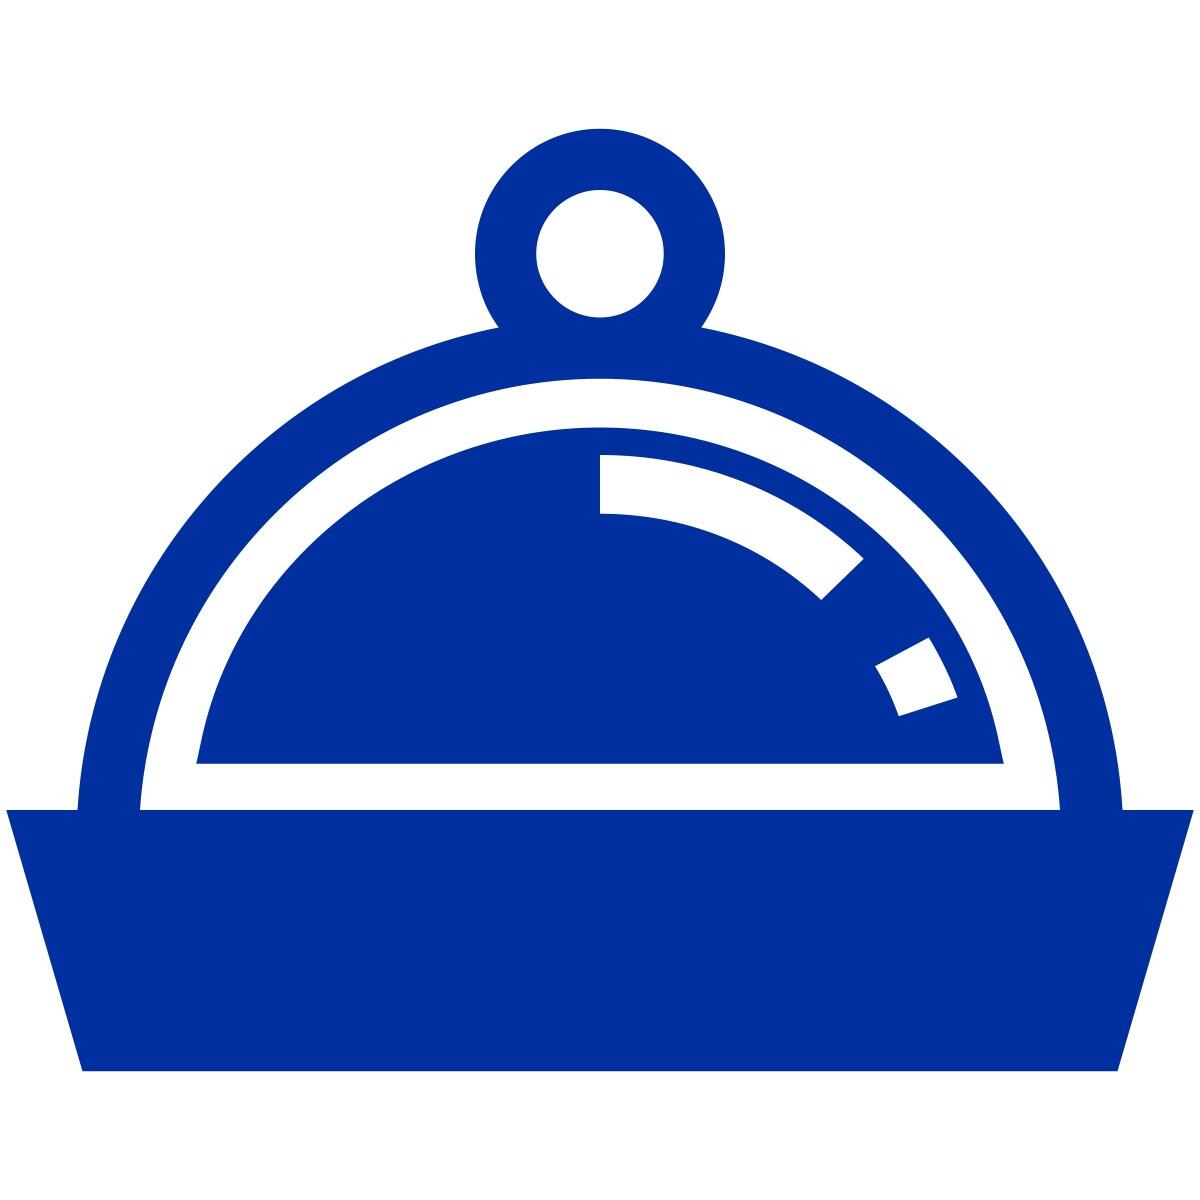 Graphical icon depicting a covered plate